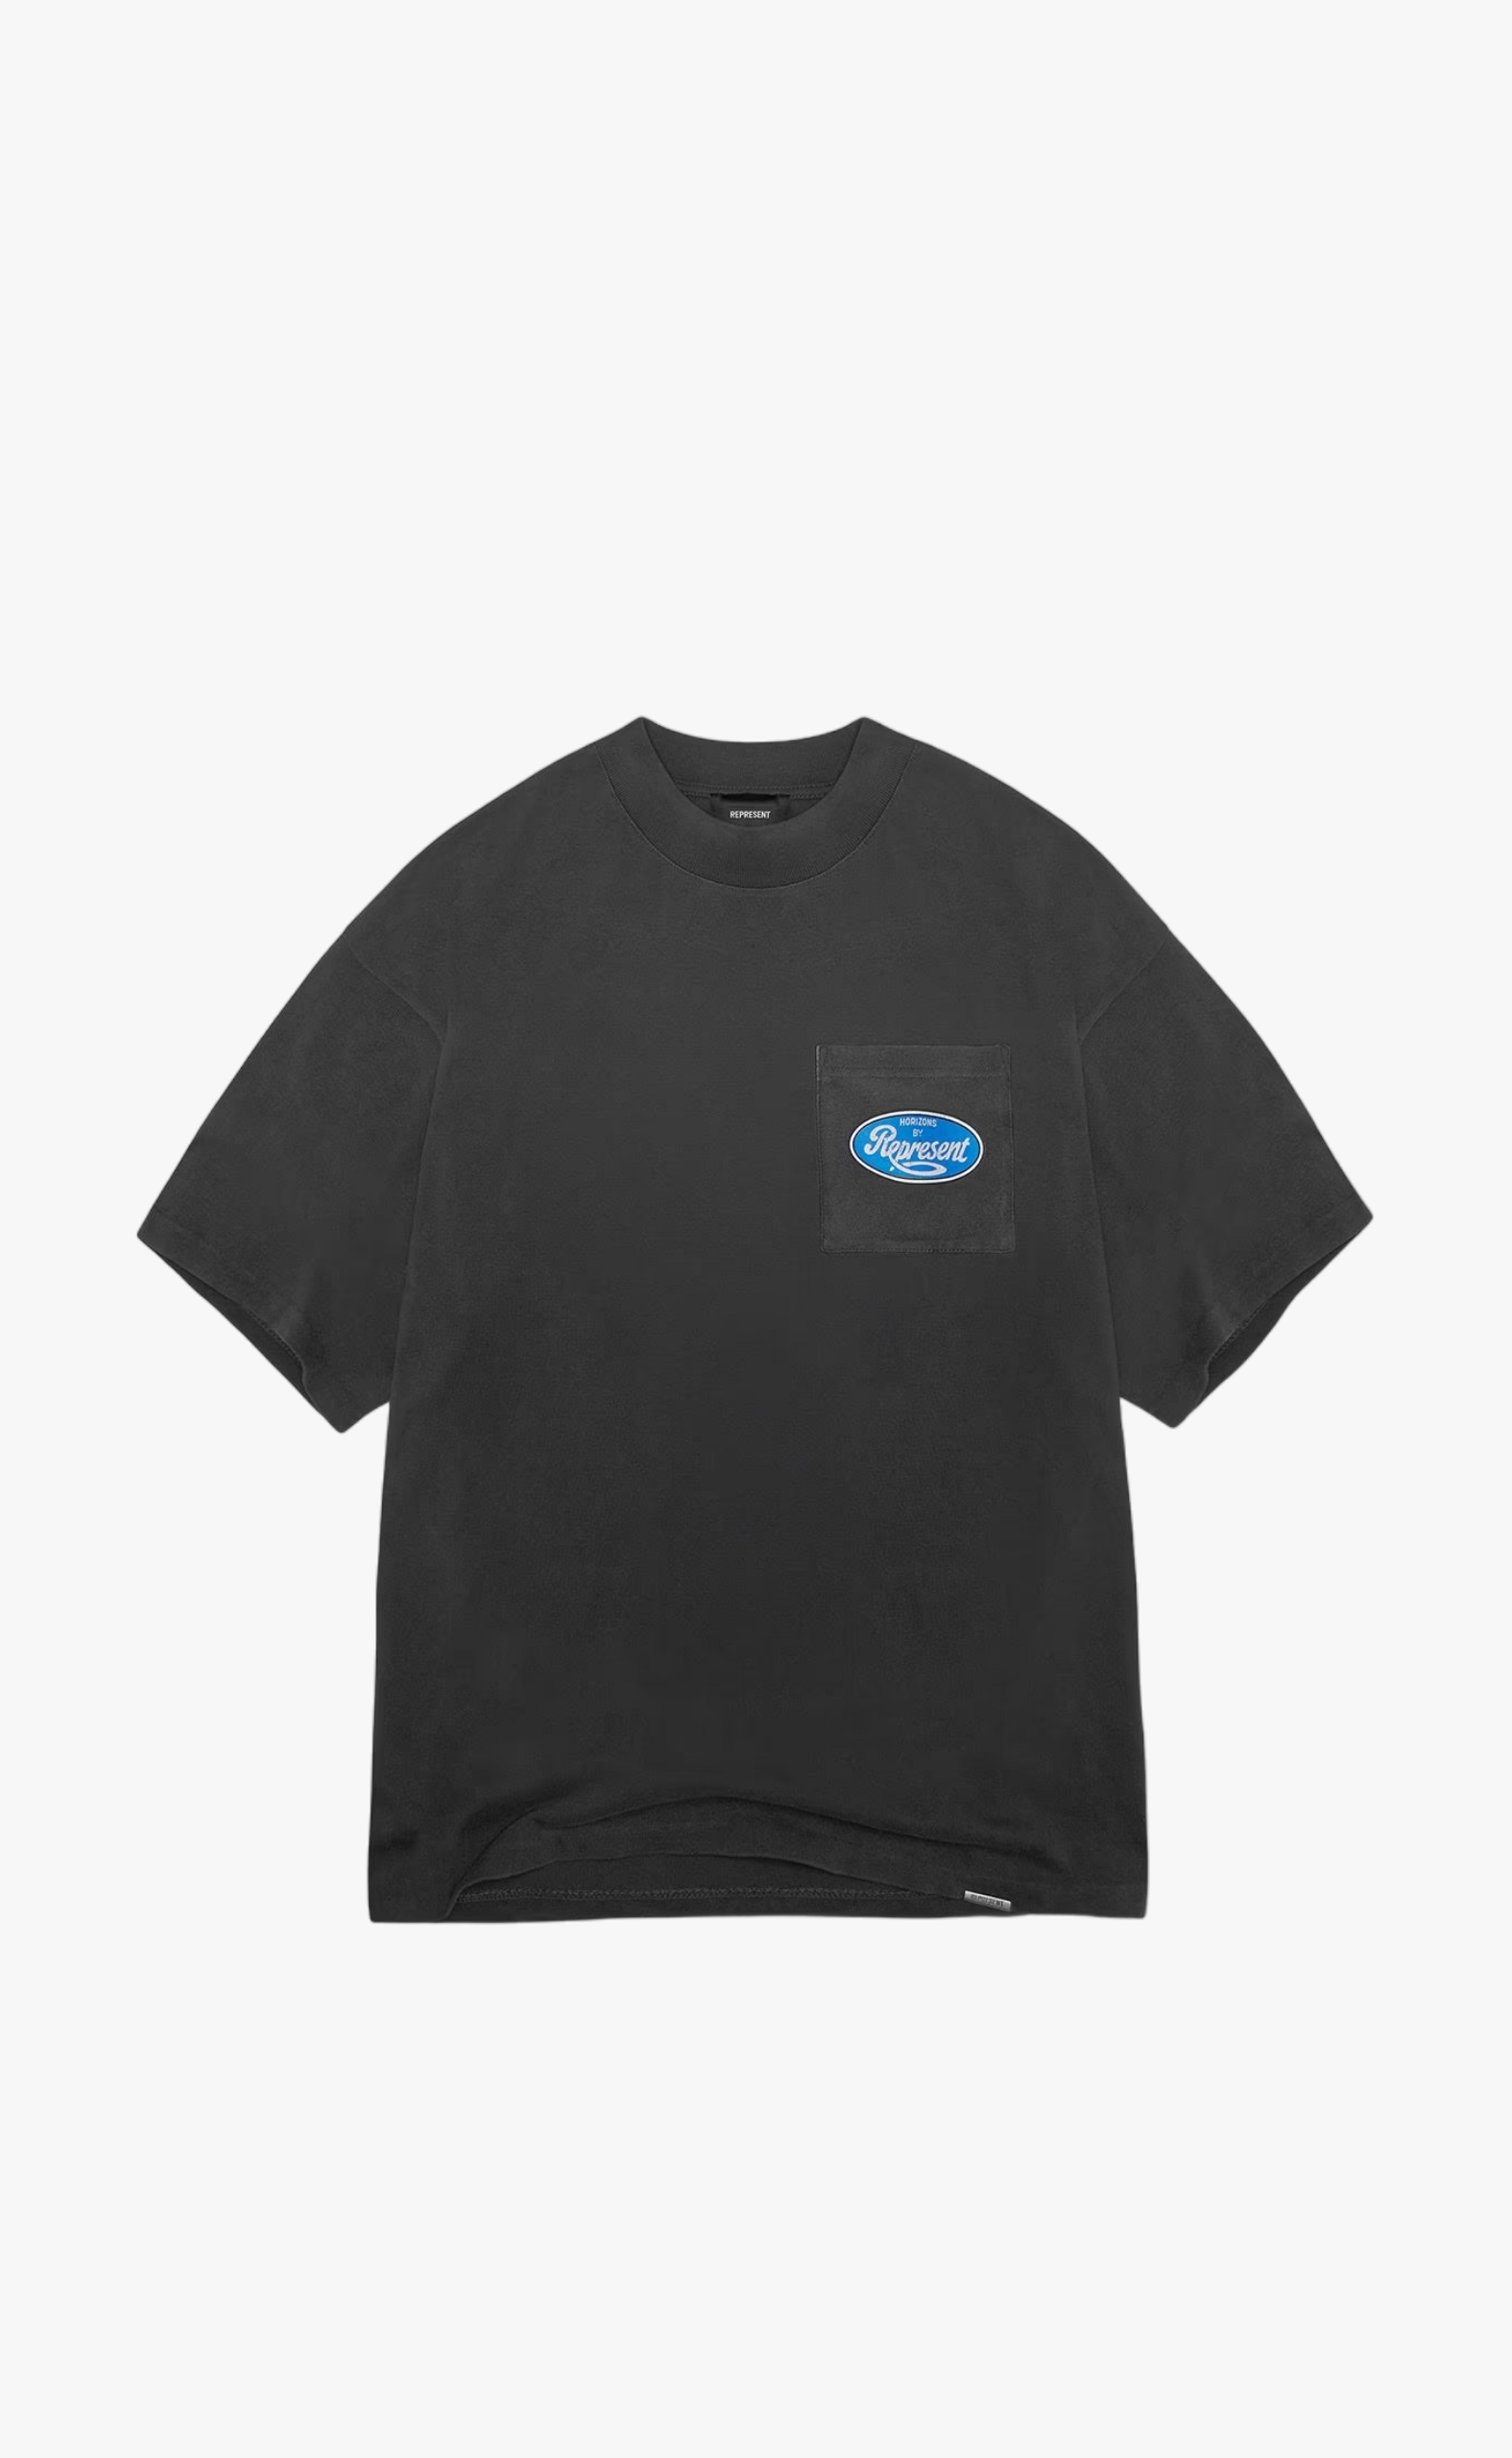 CLASSIC PARTS WASHED BLACK T-SHIRT